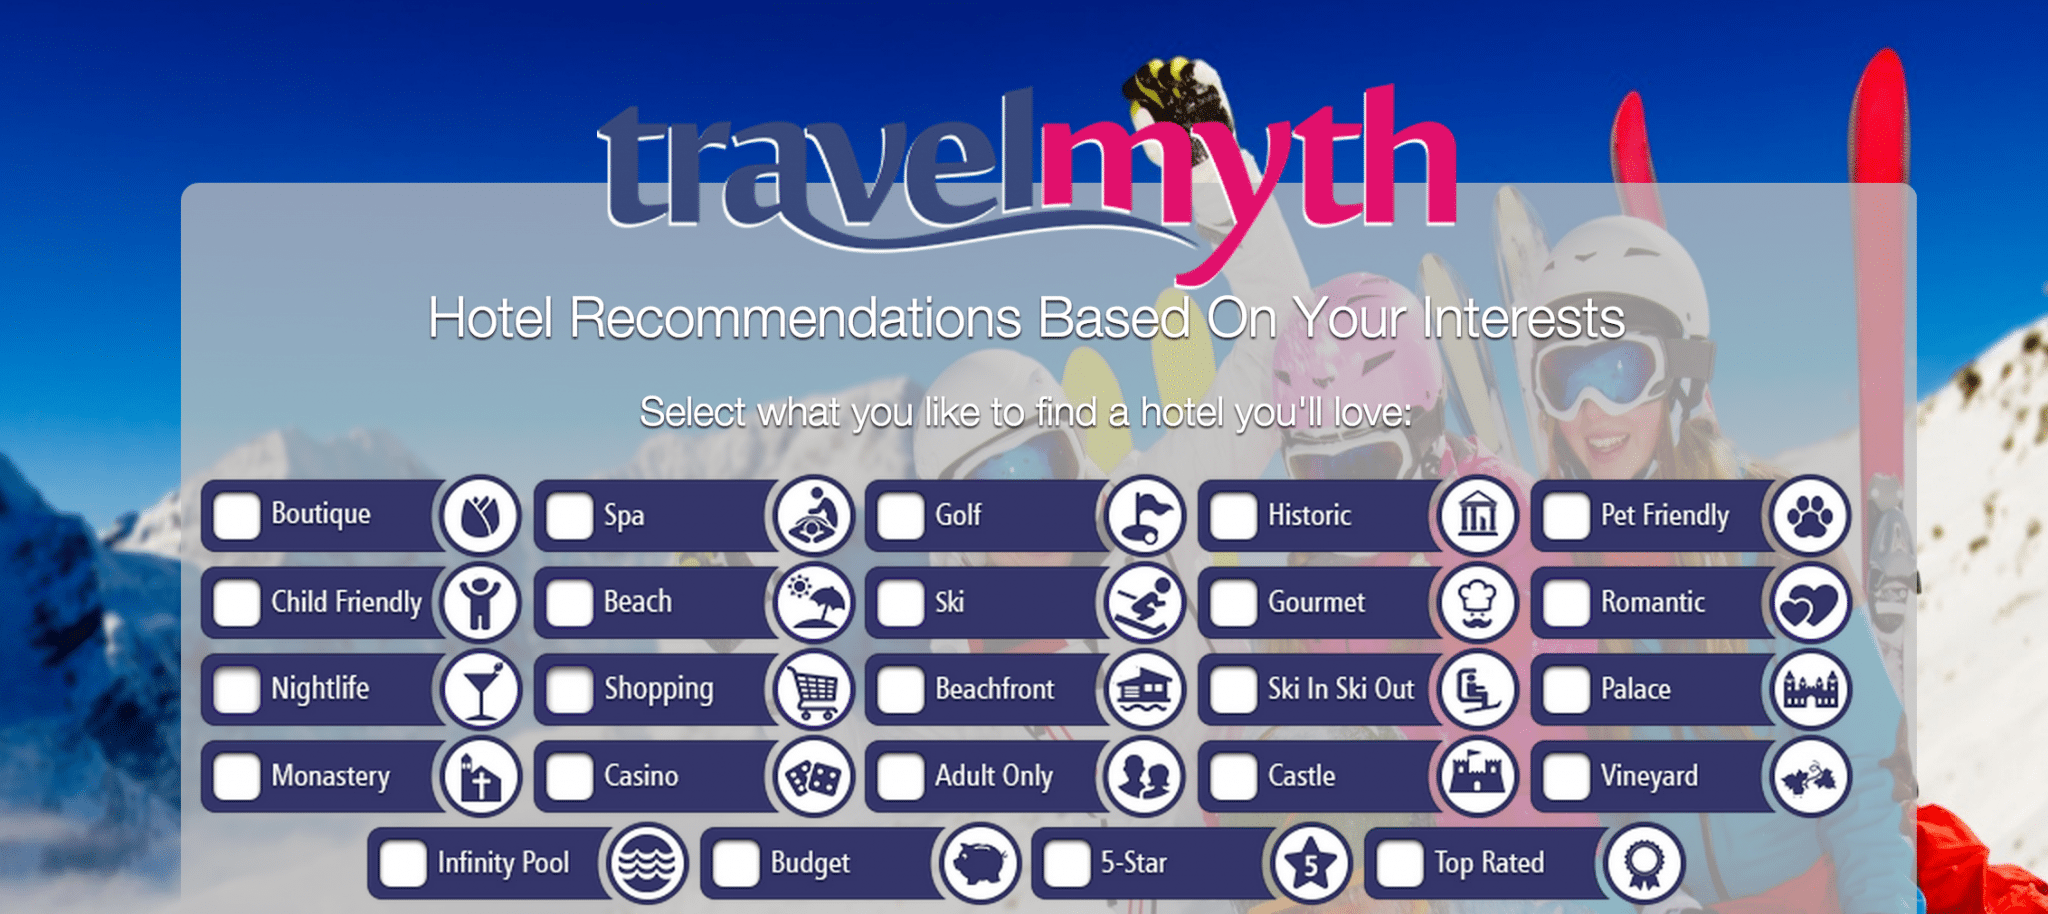 Travelmyth makes hotel recommendations for you based on your interests.